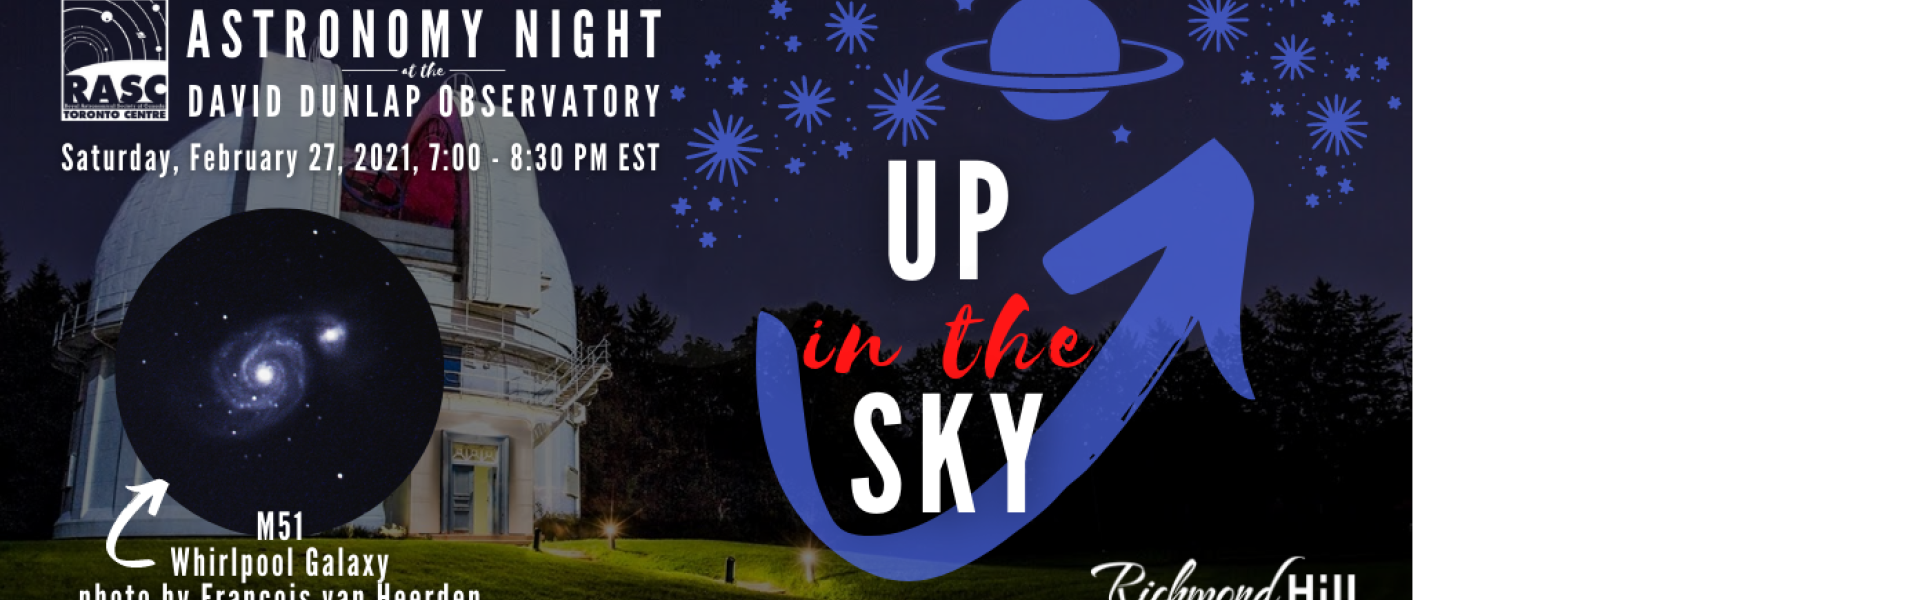 Up in the Sky Feb27